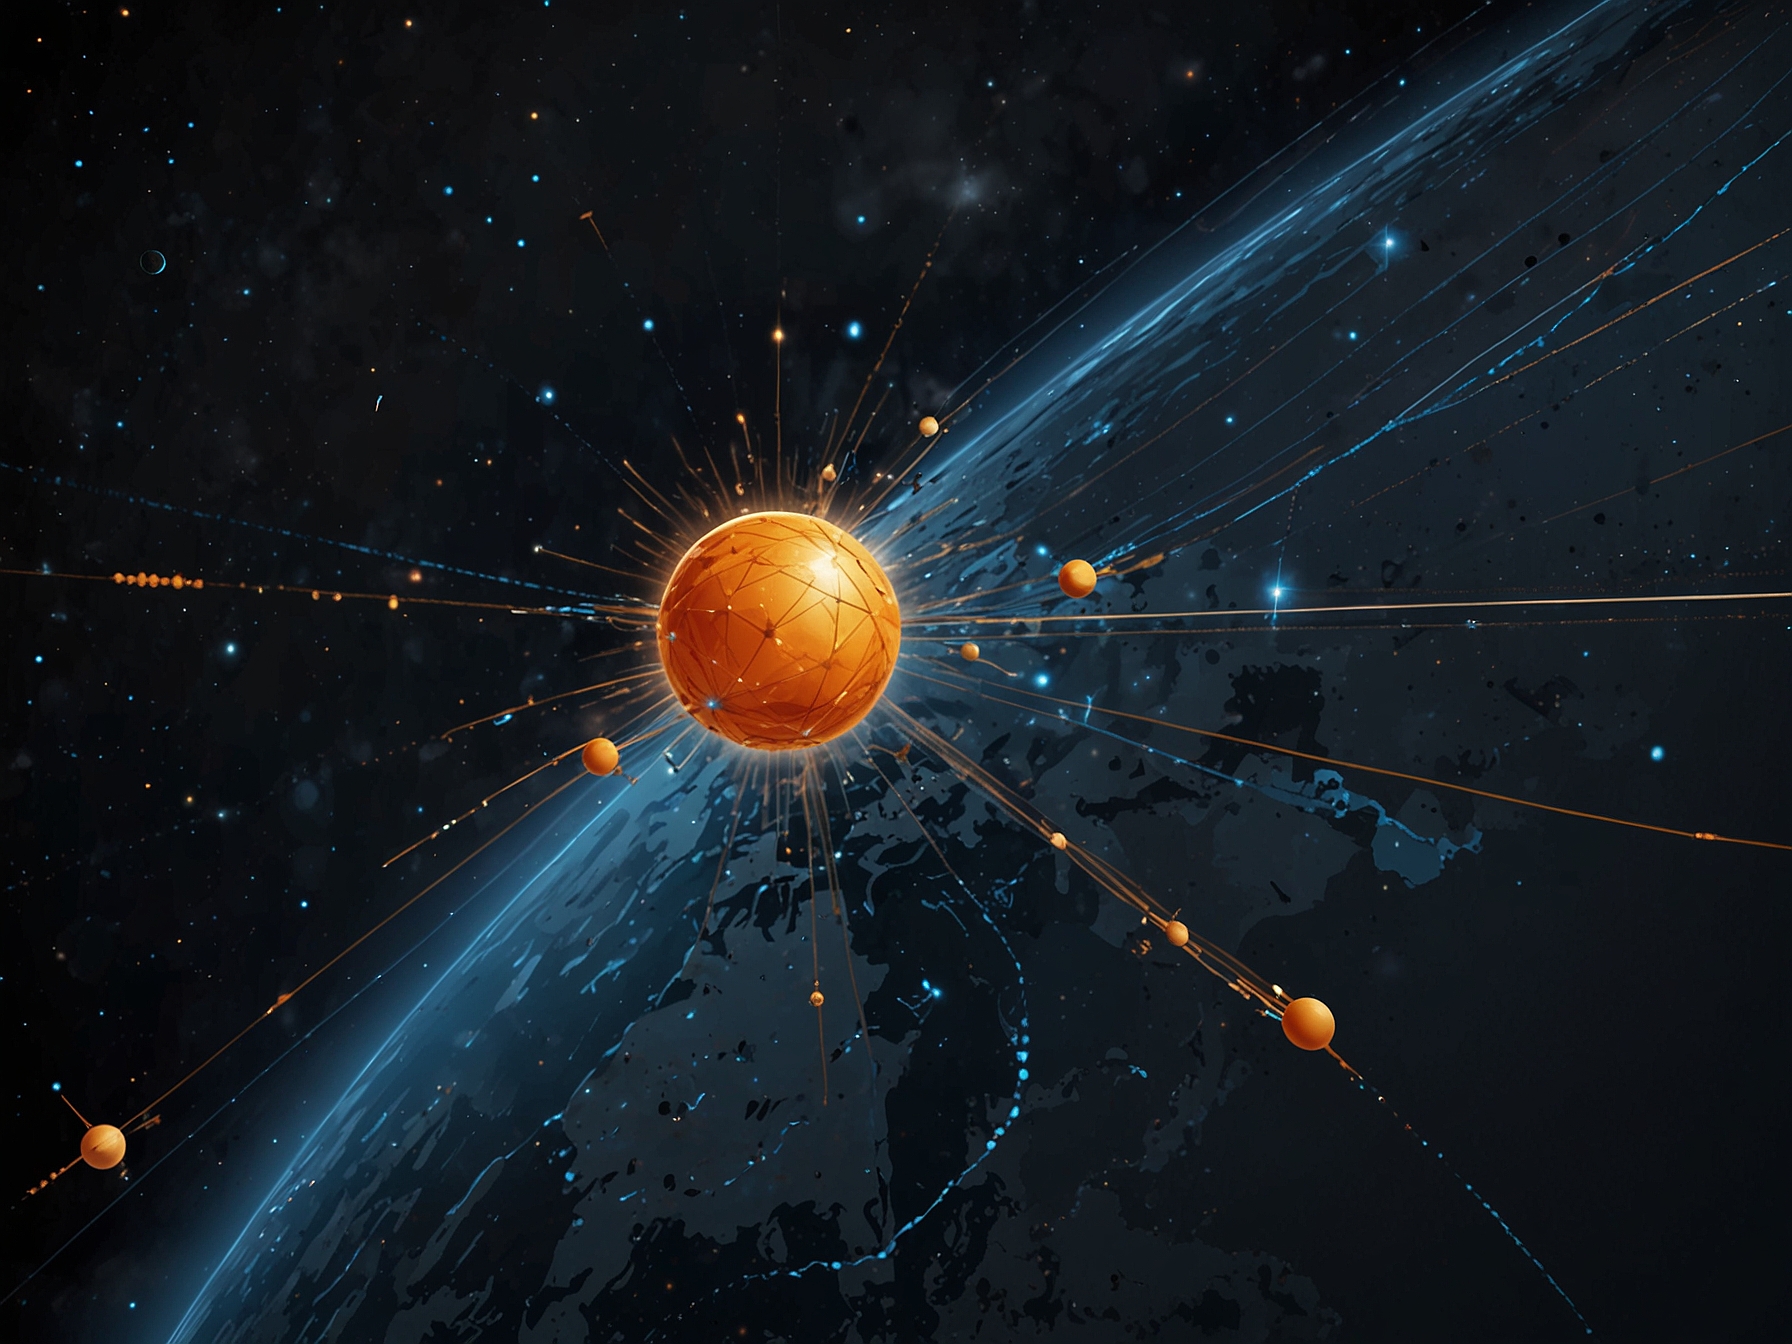 Illustration of satellites in space with data streams, highlighting the role of Palantir's data analytics in enhancing Starlab's space operations and infrastructure.